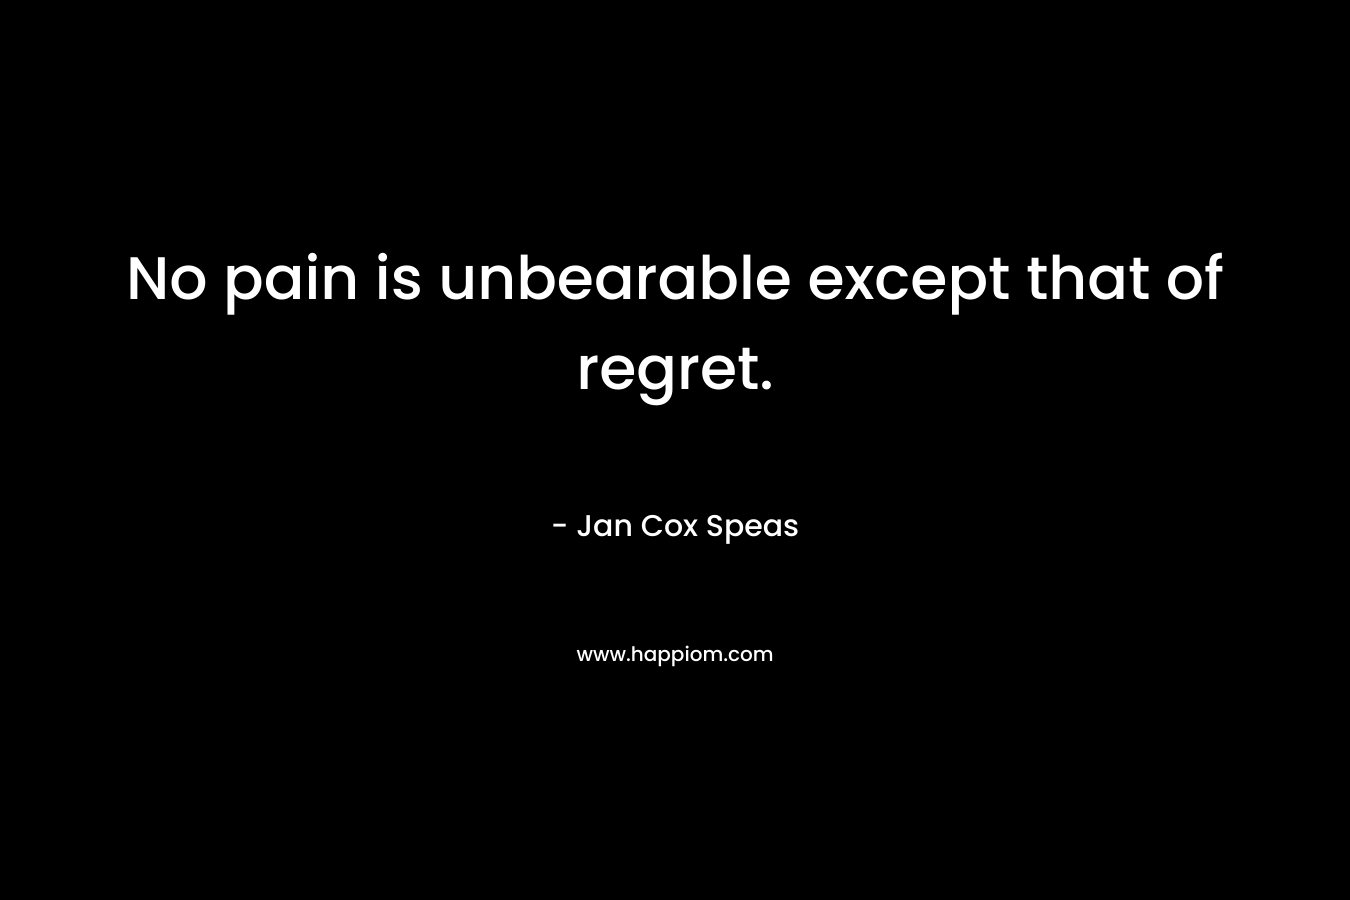 No pain is unbearable except that of regret.